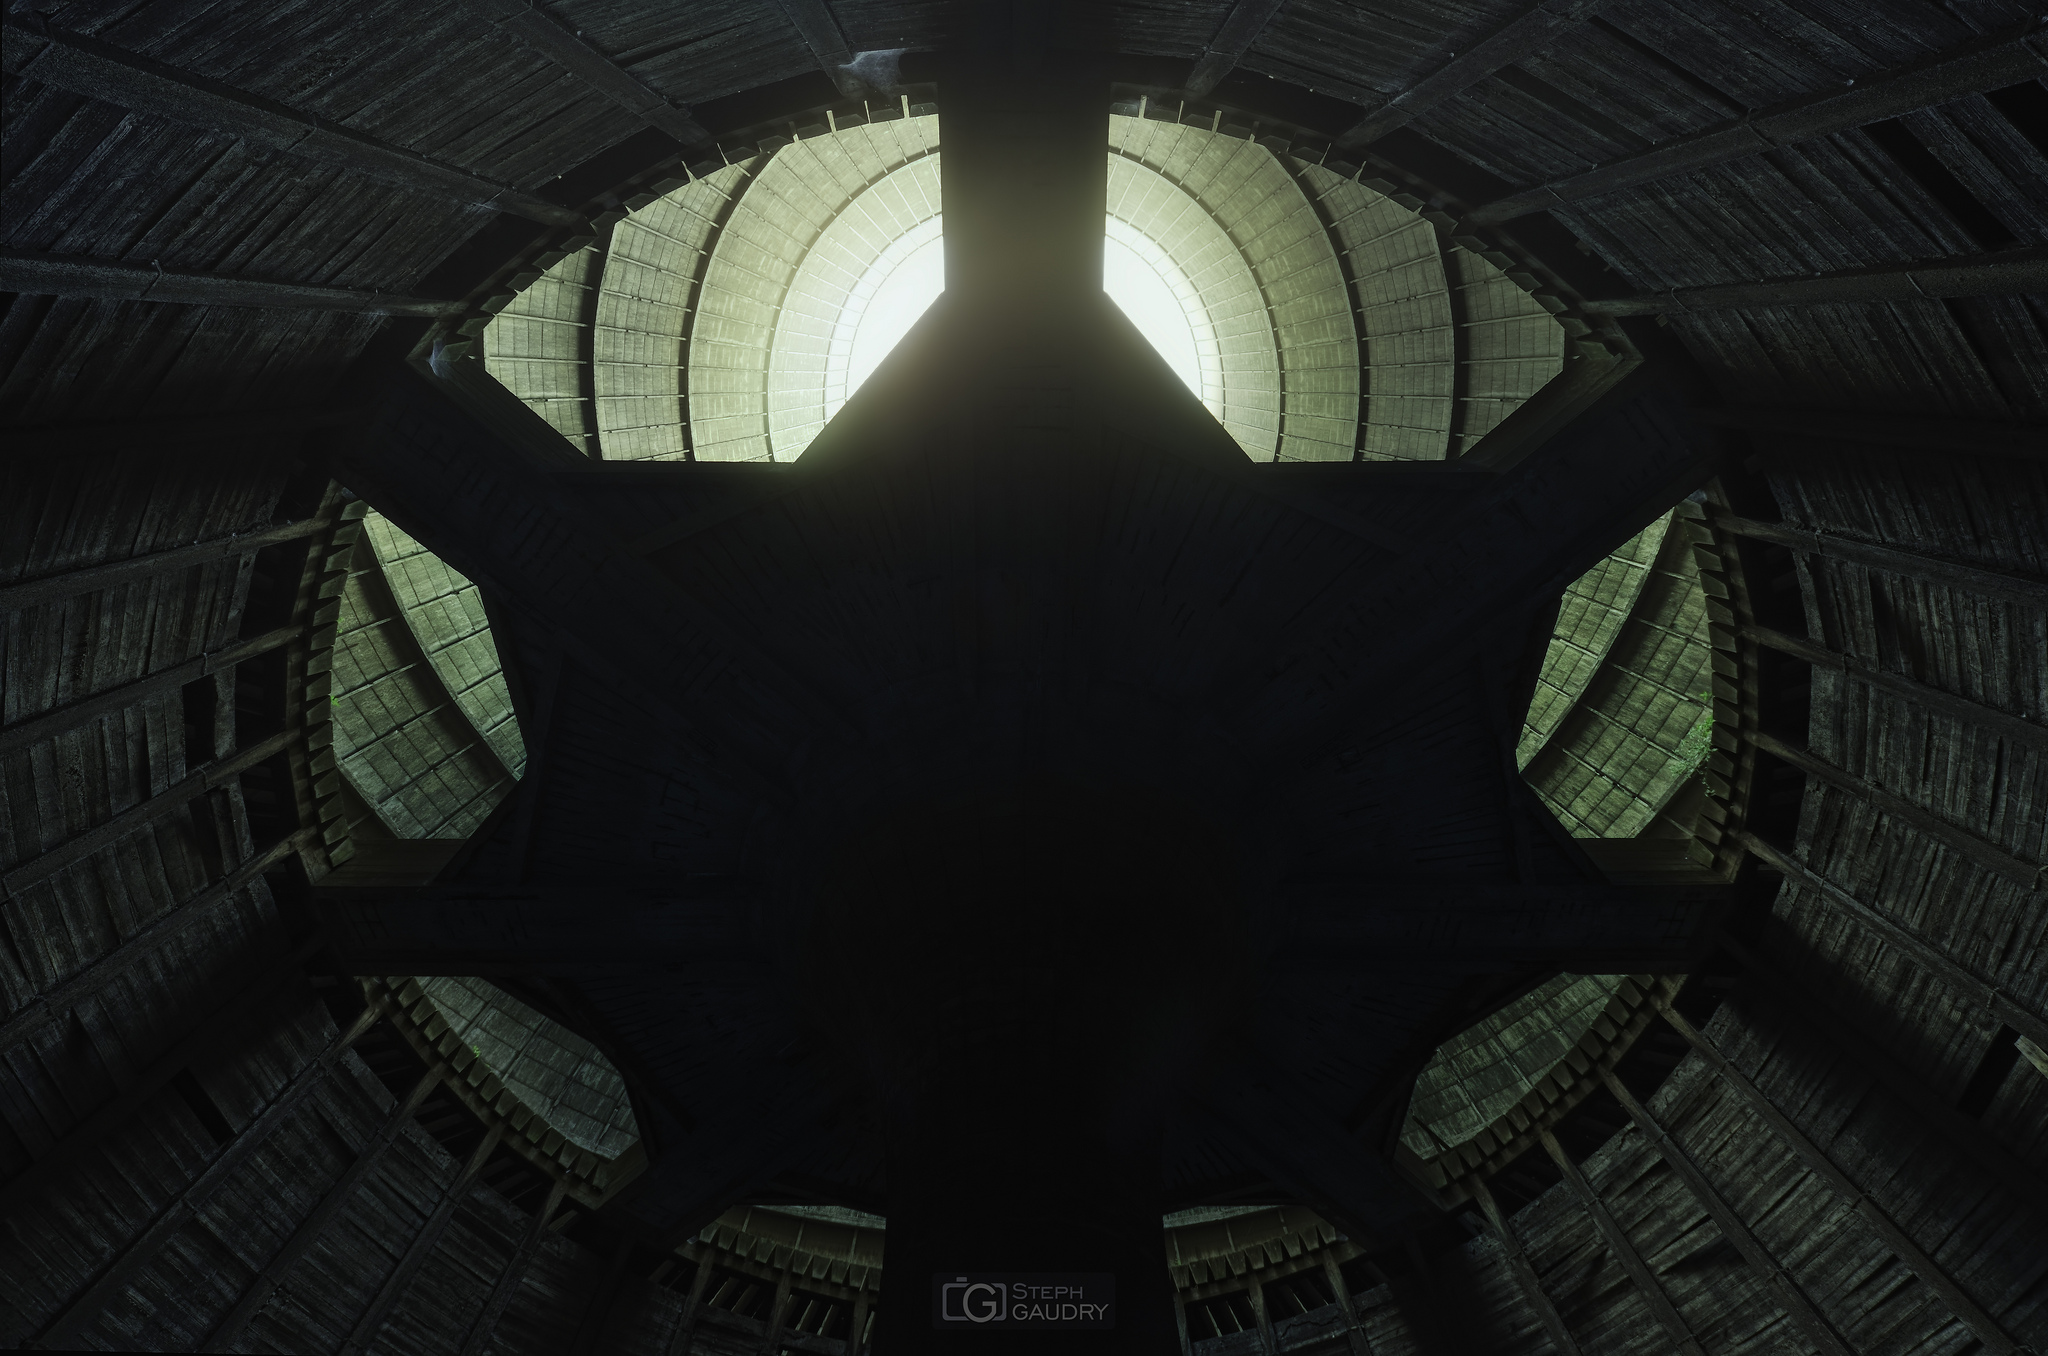 Architecture et graphisme / Inside the Death Star (full circle)